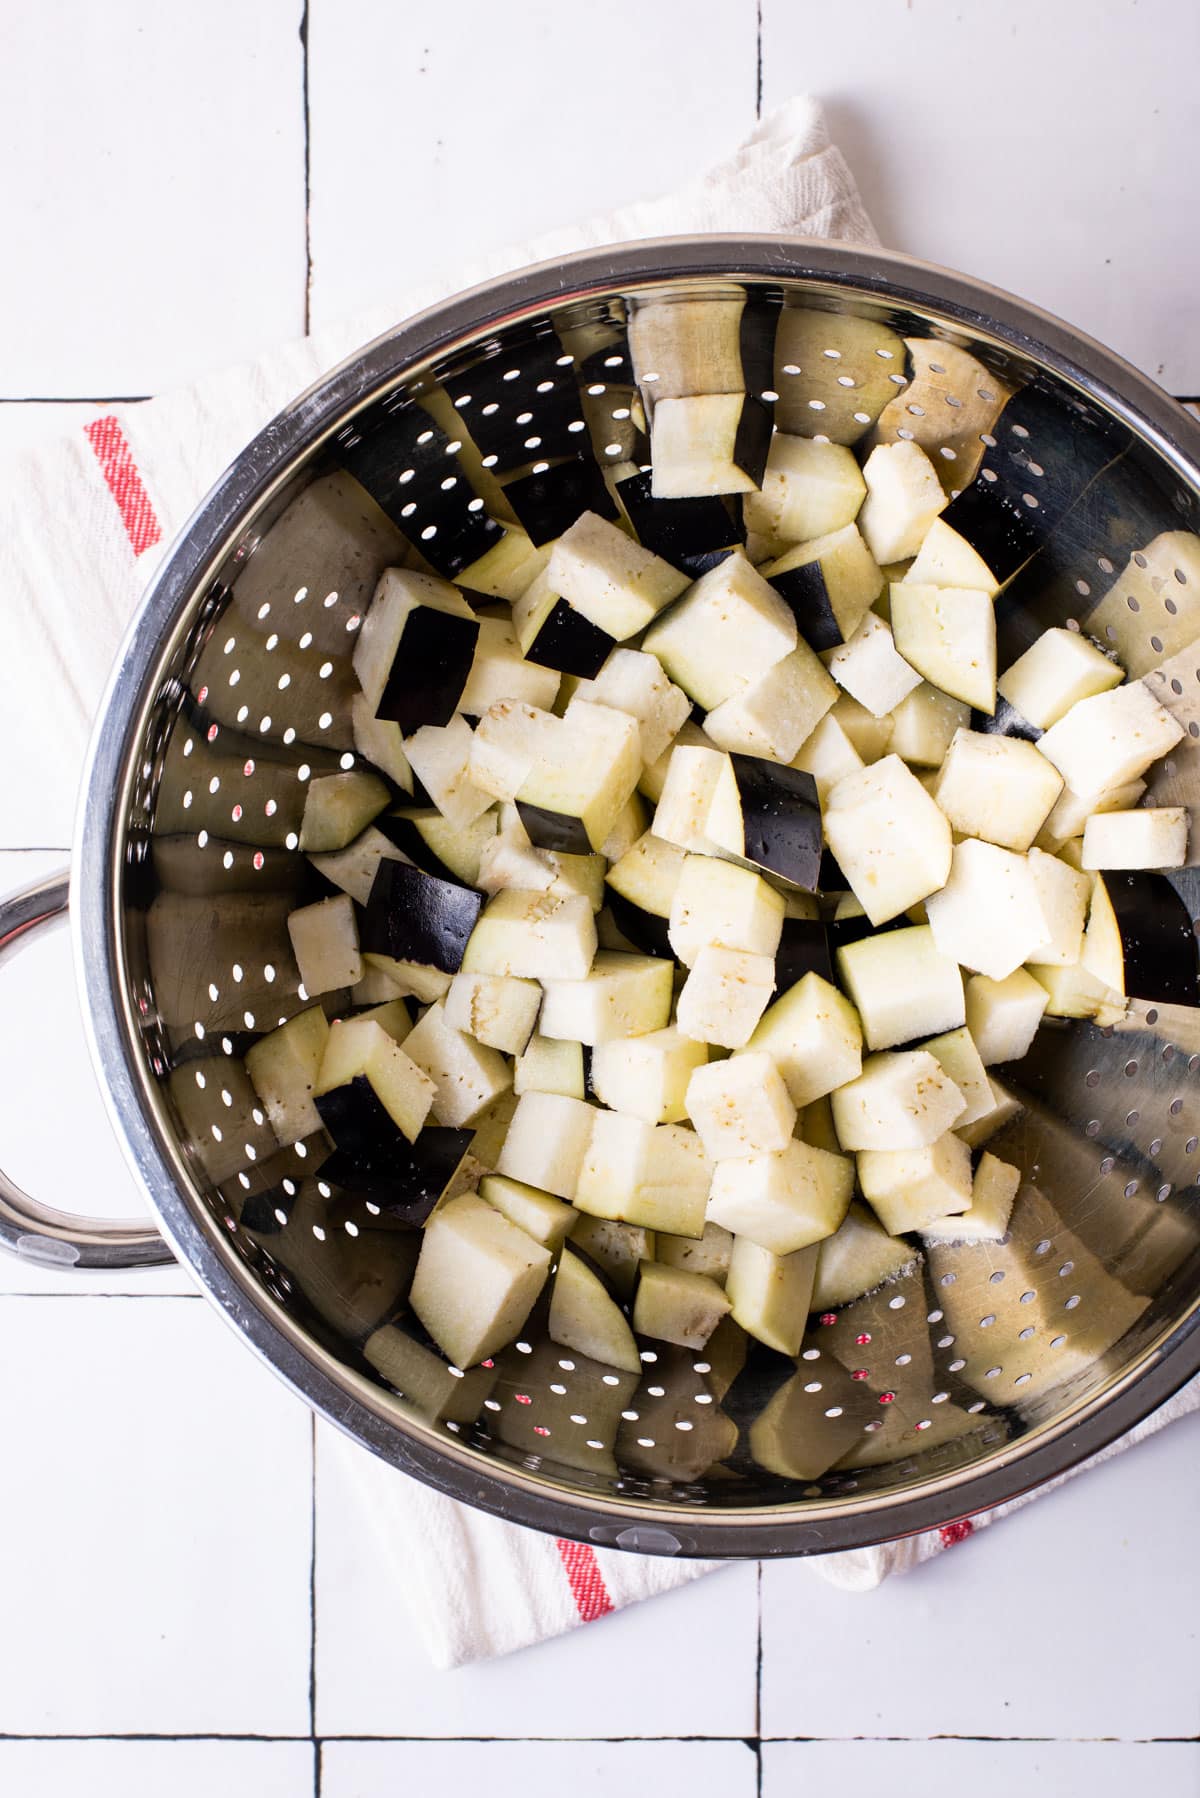 Salted eggplant cubes in a colander.